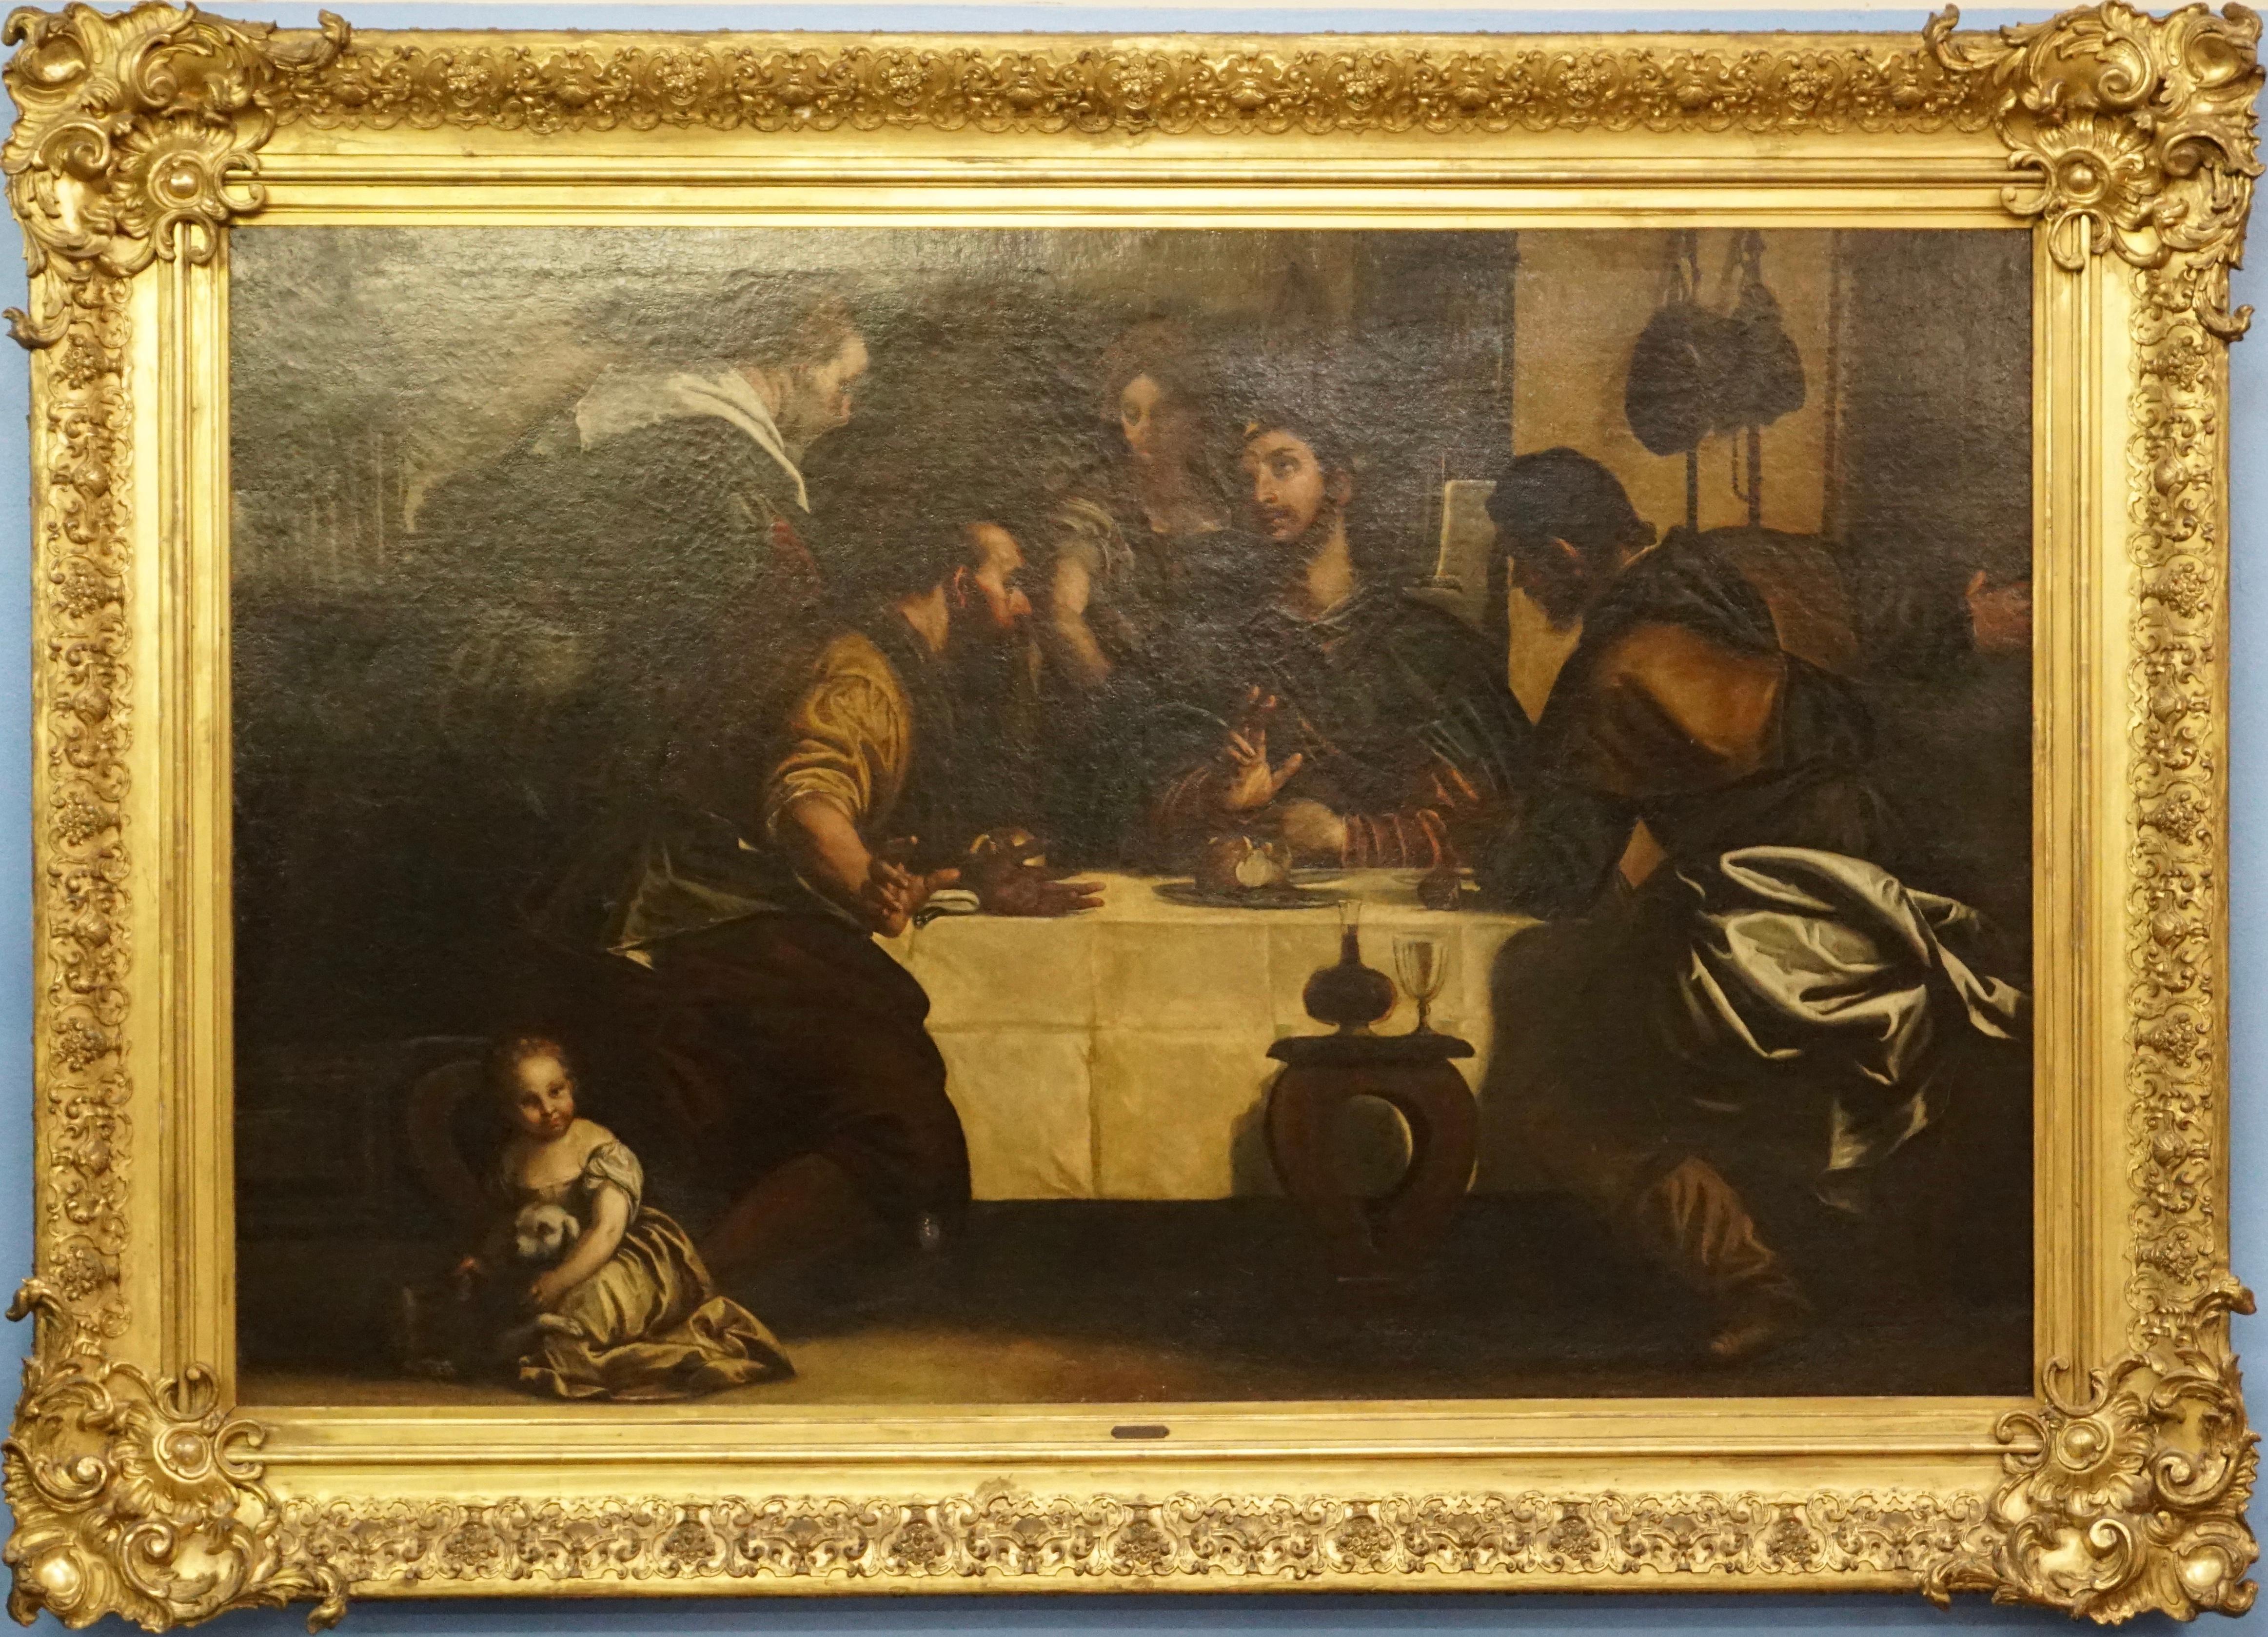 Italian After Paolo Caliari Veronese “The Supper At Emmaus” Painting